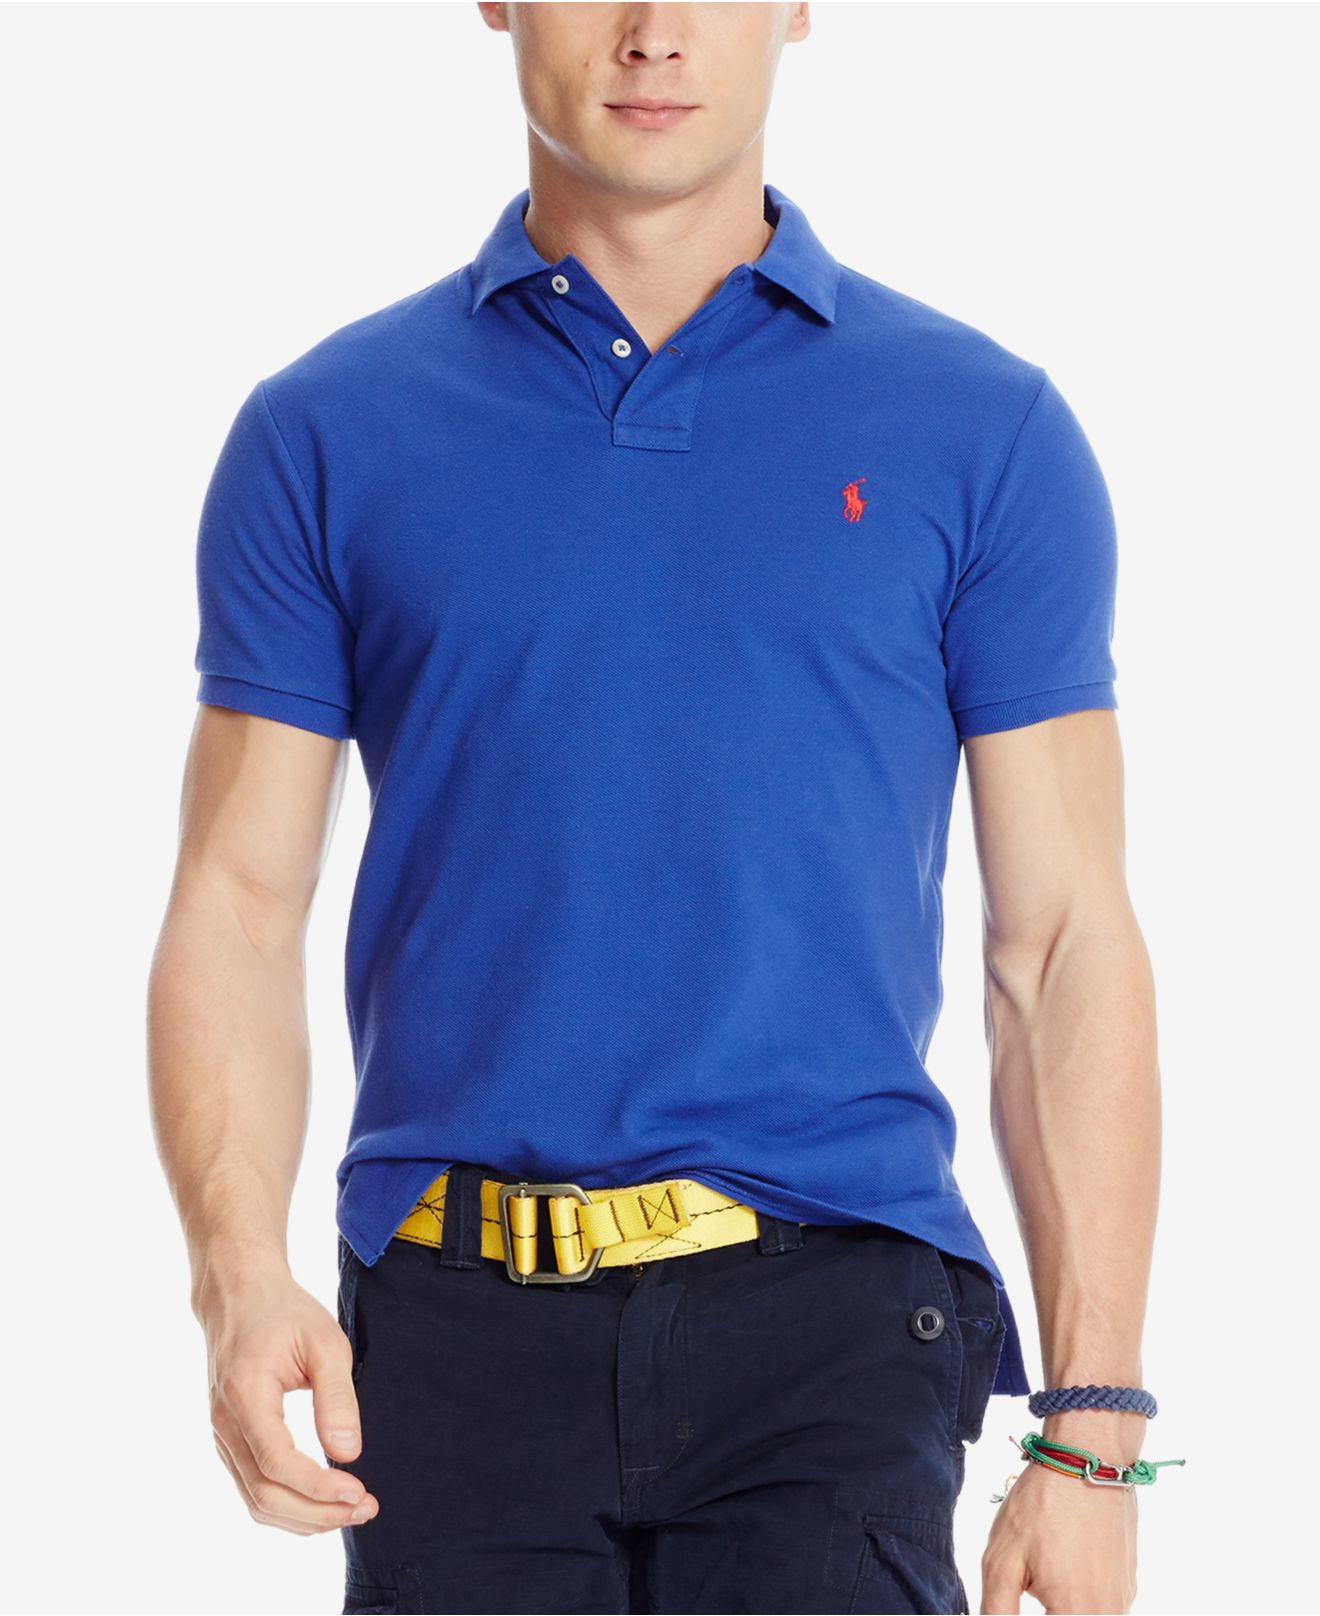 Lyst - Polo Ralph Lauren Classic-fit Mesh Polo Shirt in Blue